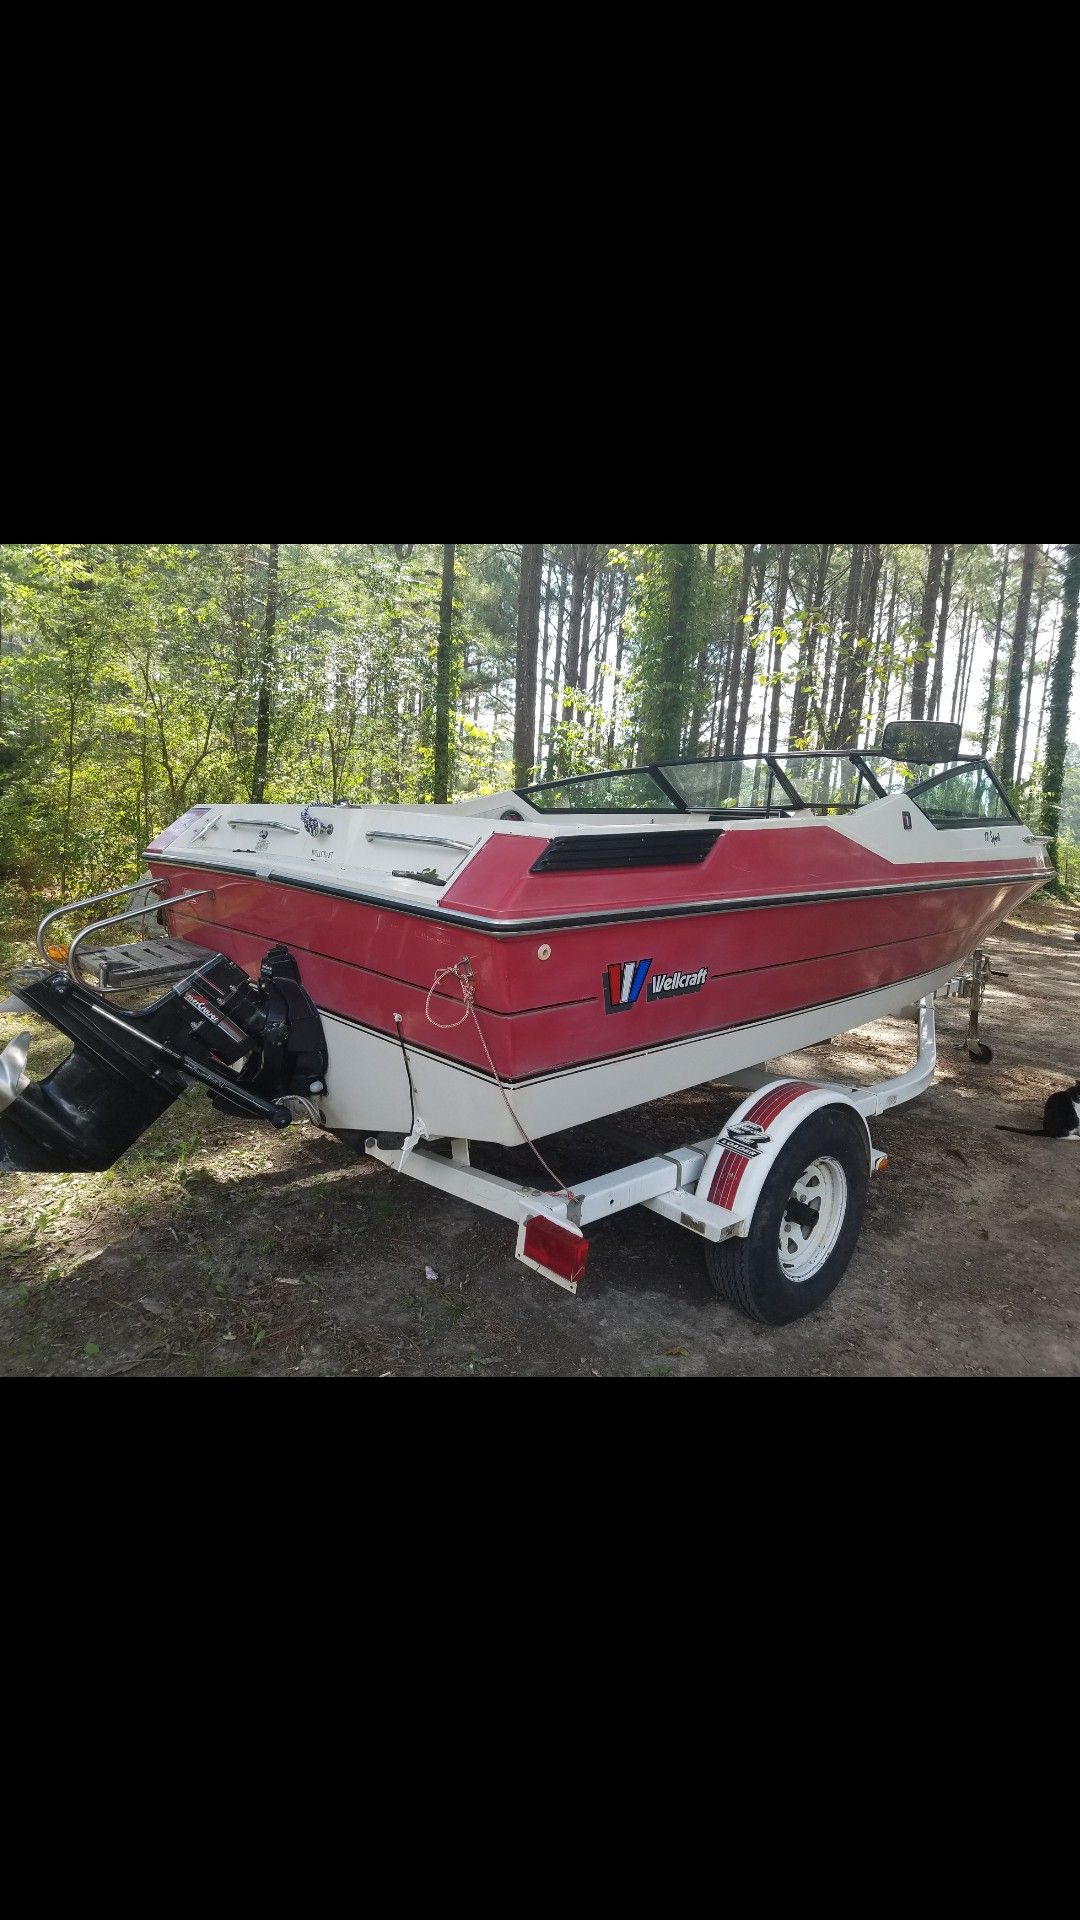 For sale: Wellcraft ski boat or trade